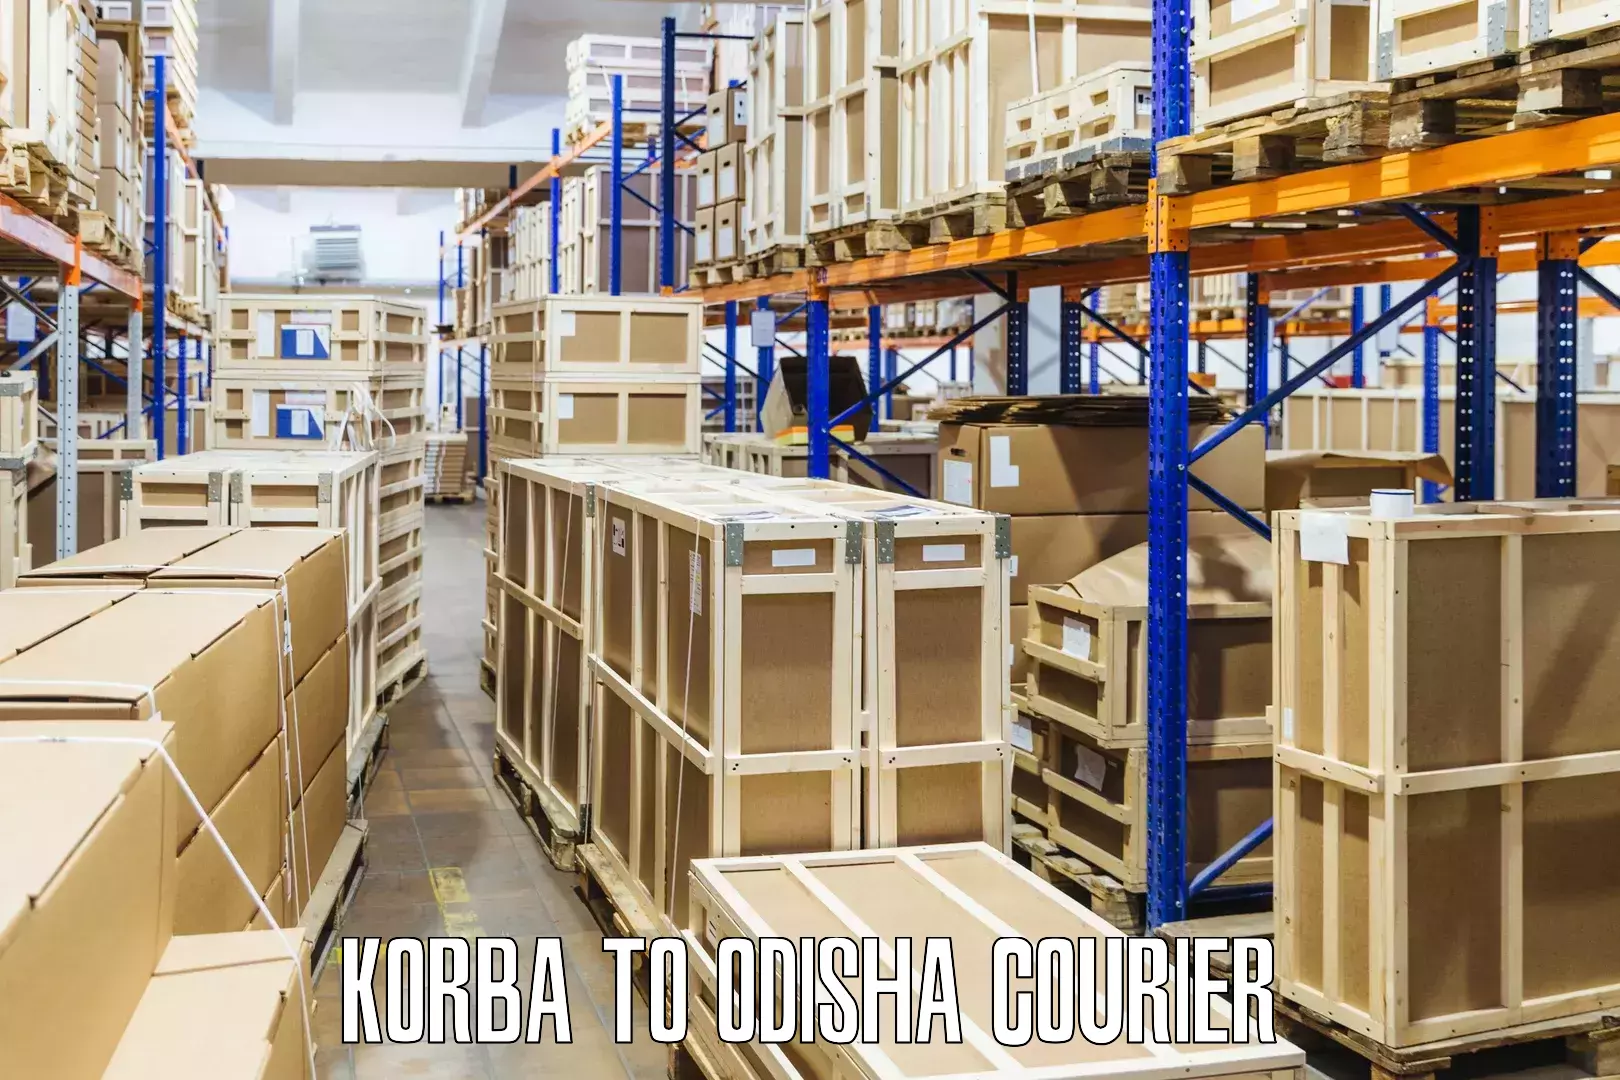 On-call courier service Korba to Riamal